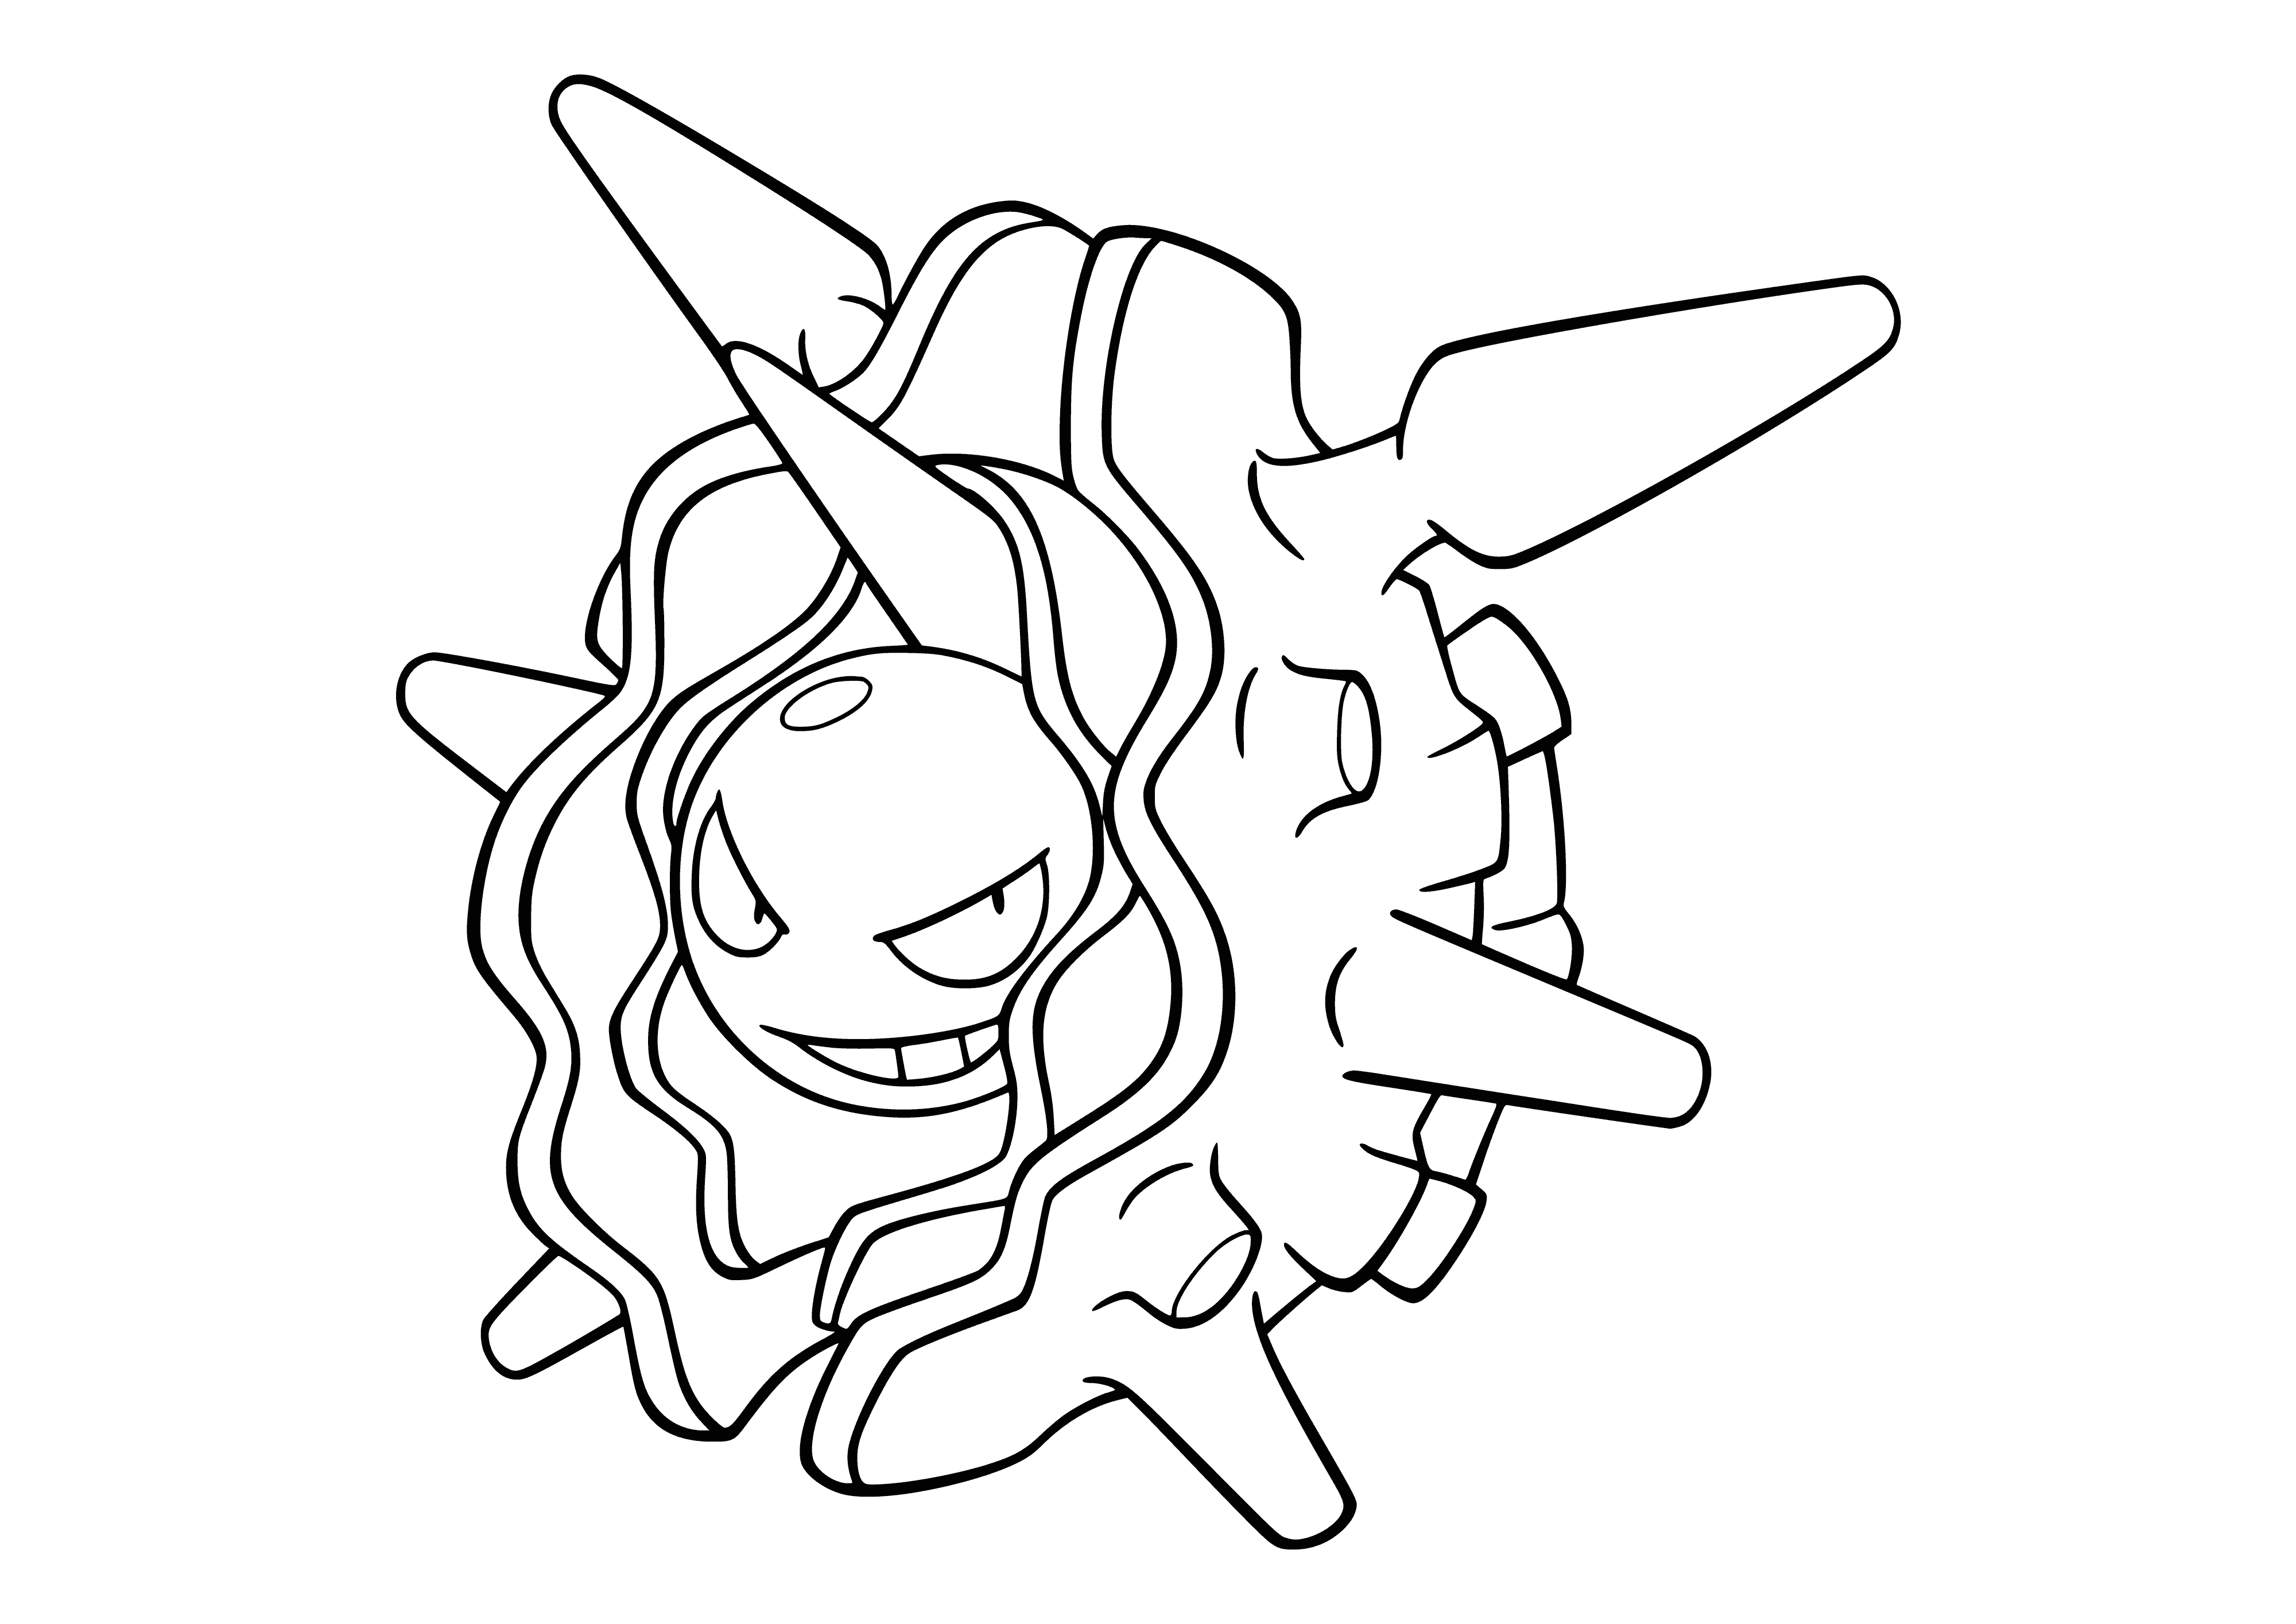 Pokemon Cloyster coloring page